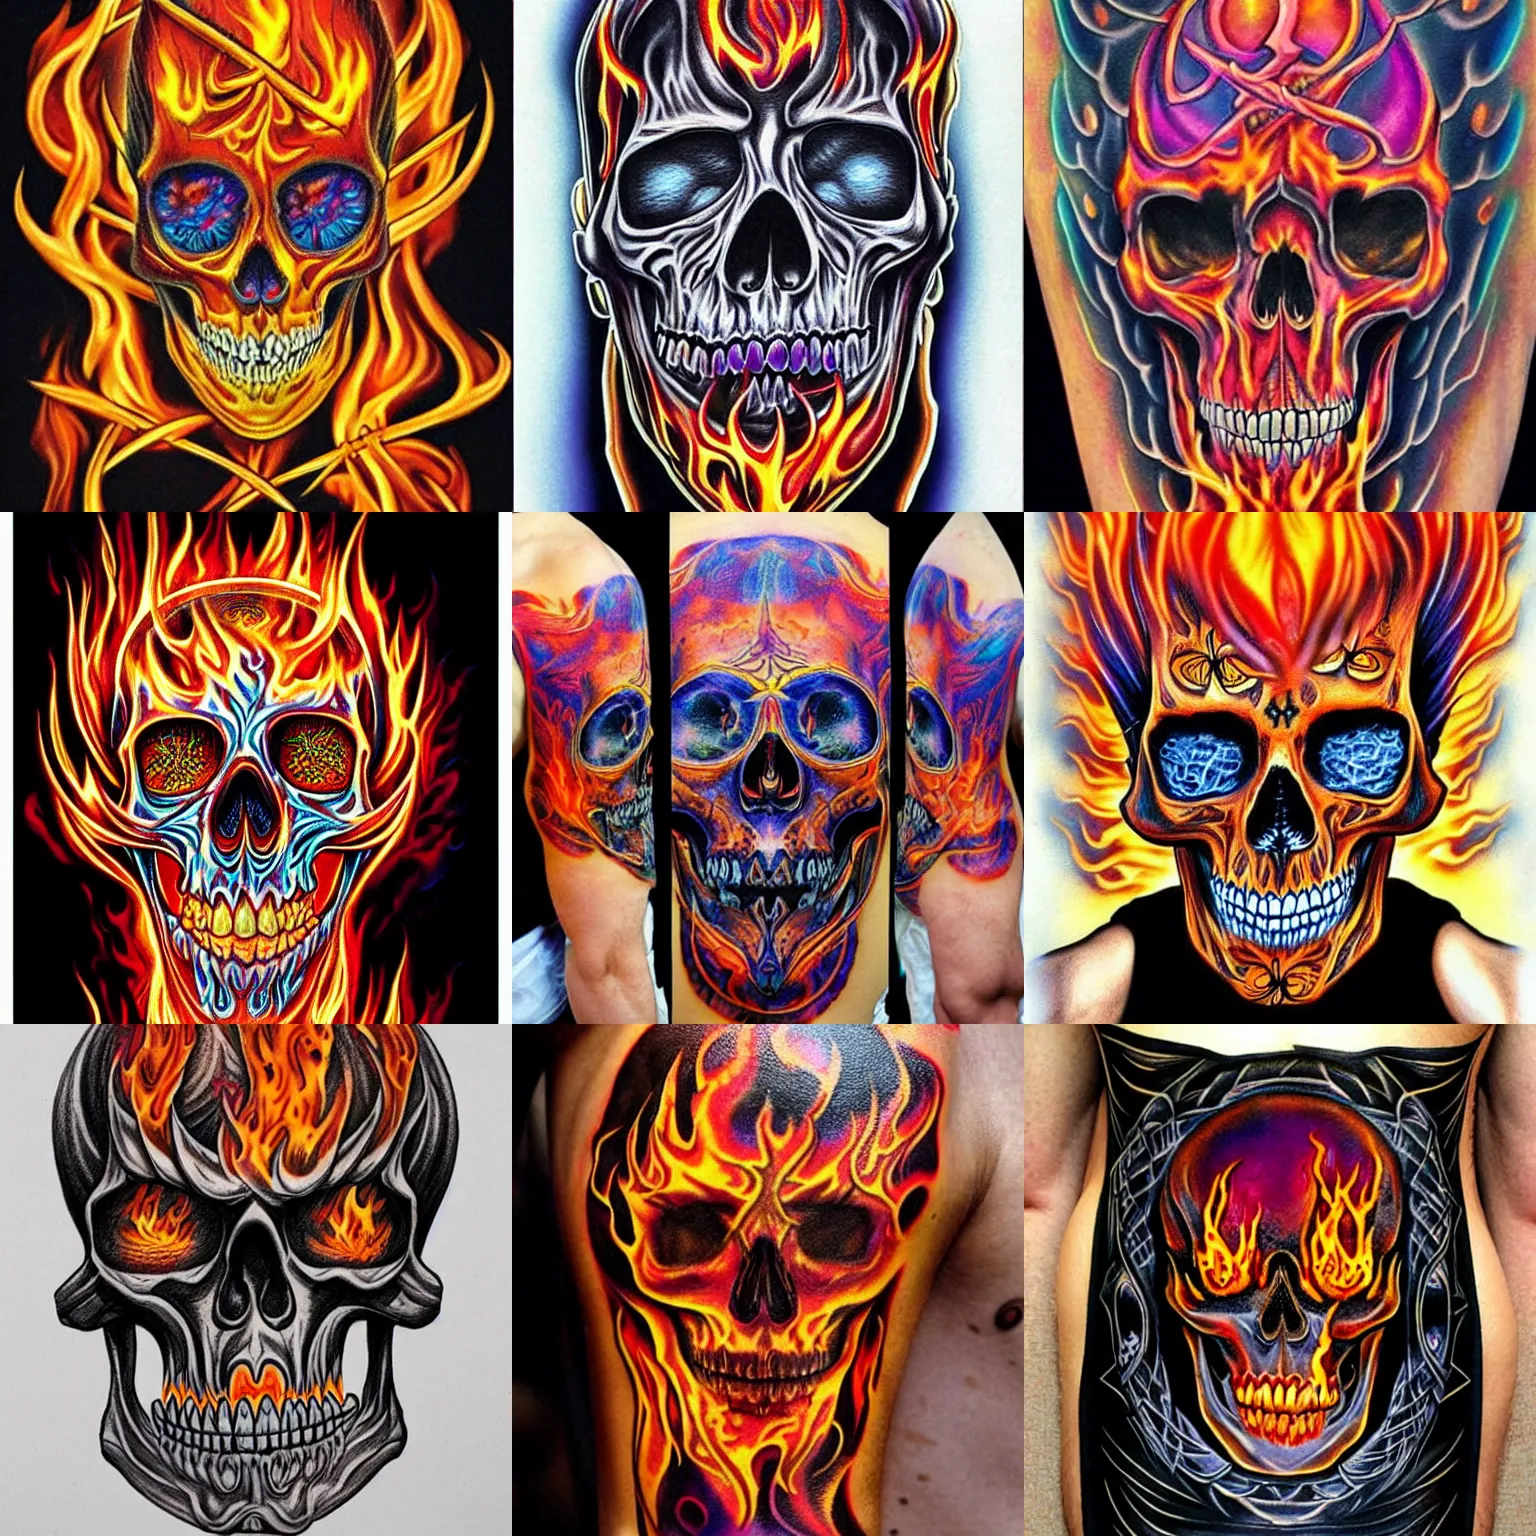 Prompt: a flaming skull tattoo design by Alex Grey, highly detailed, flames